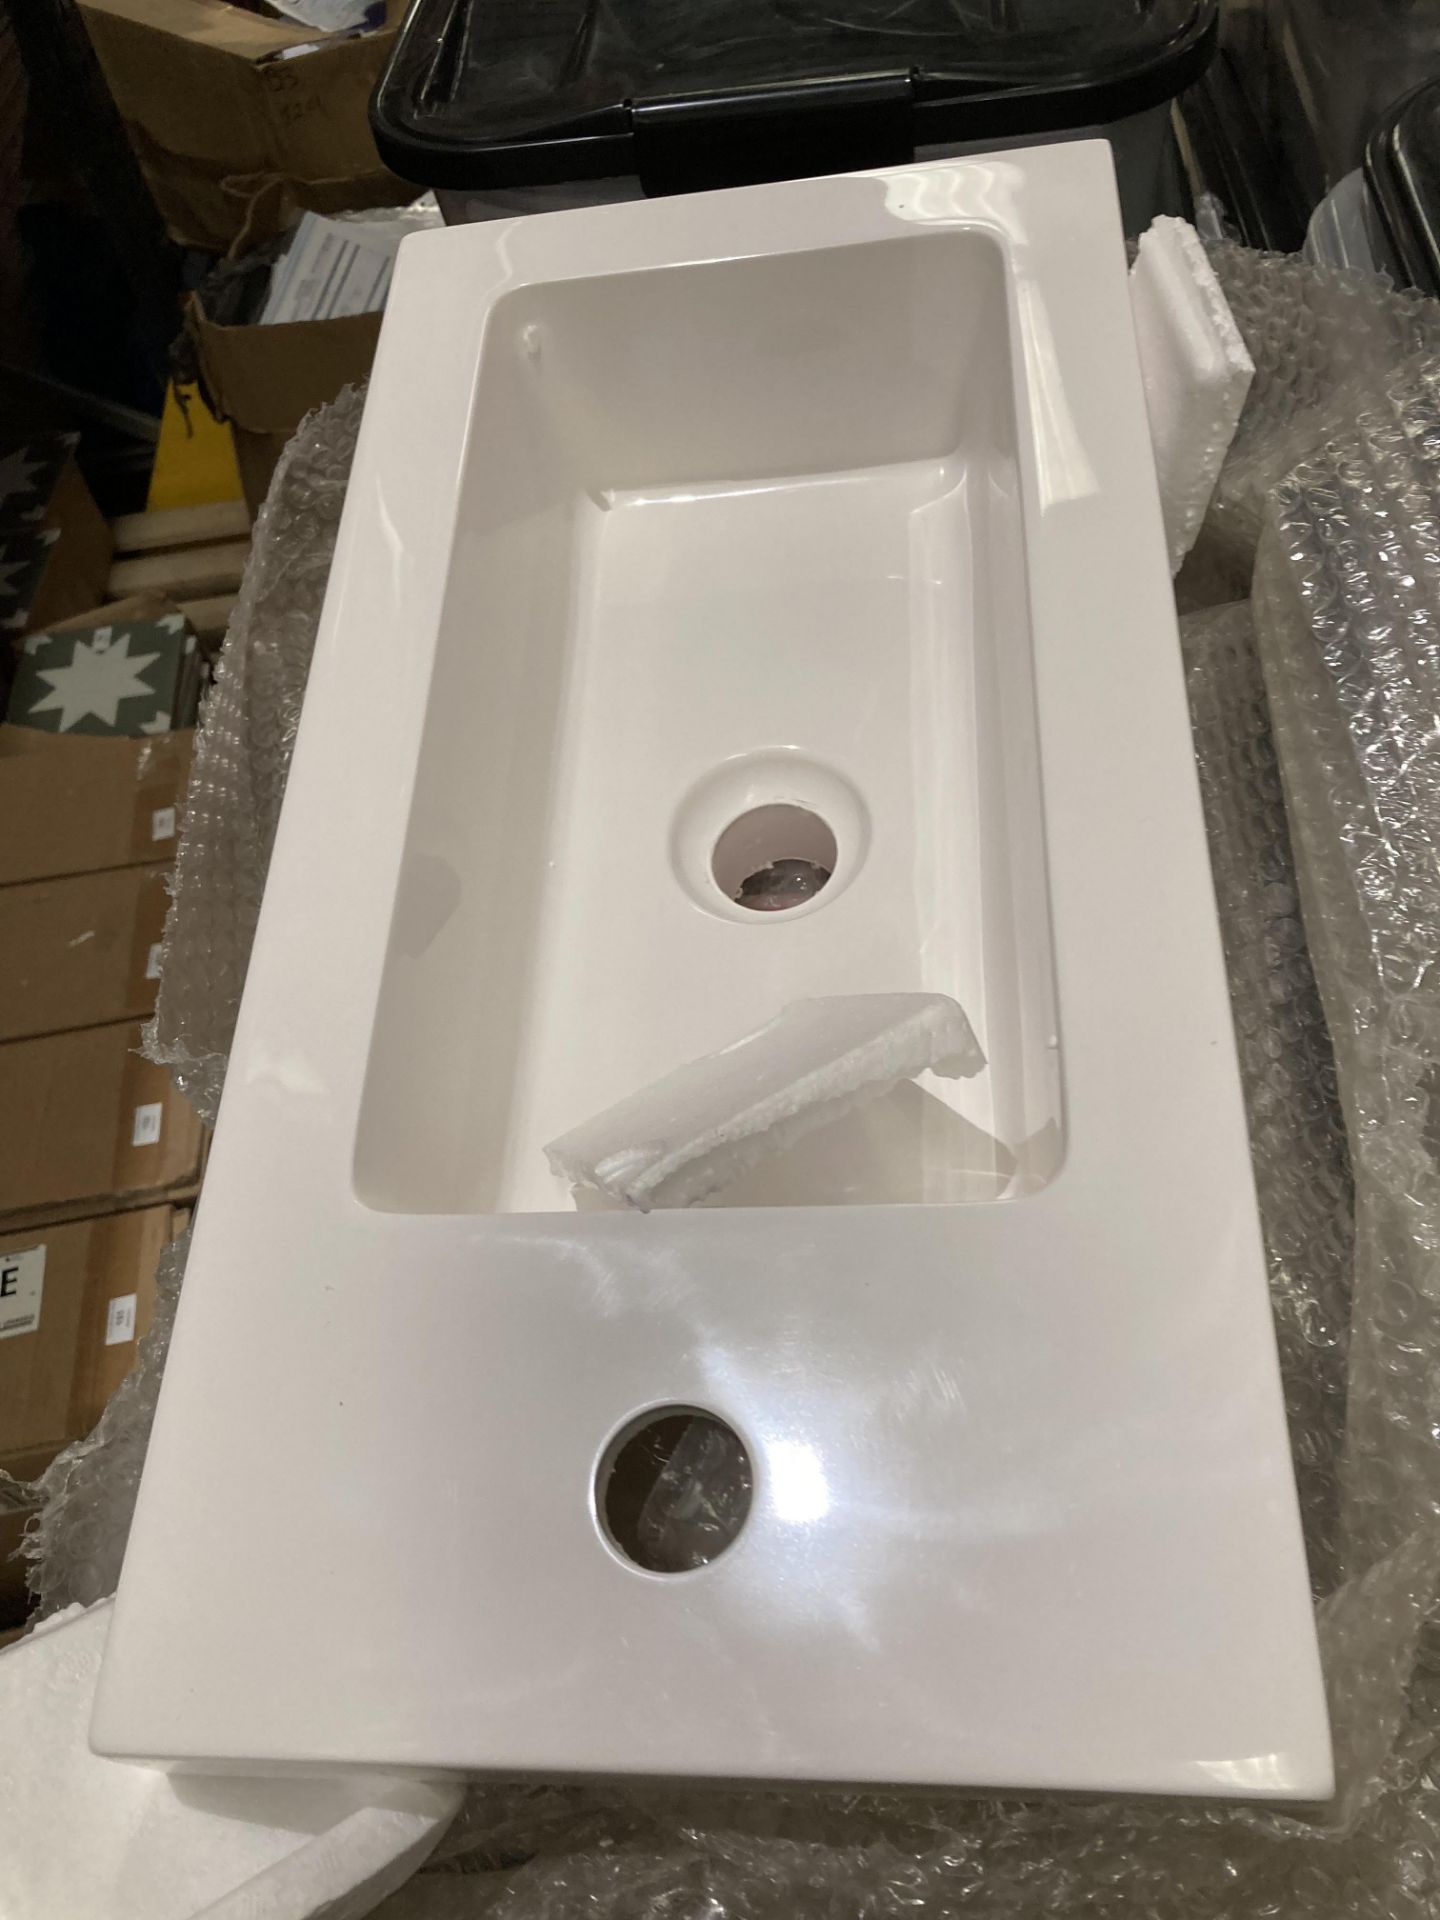 White resin side tap single tap hole basin 502mmx 255mm x135mm - new boxed (saleroom location: